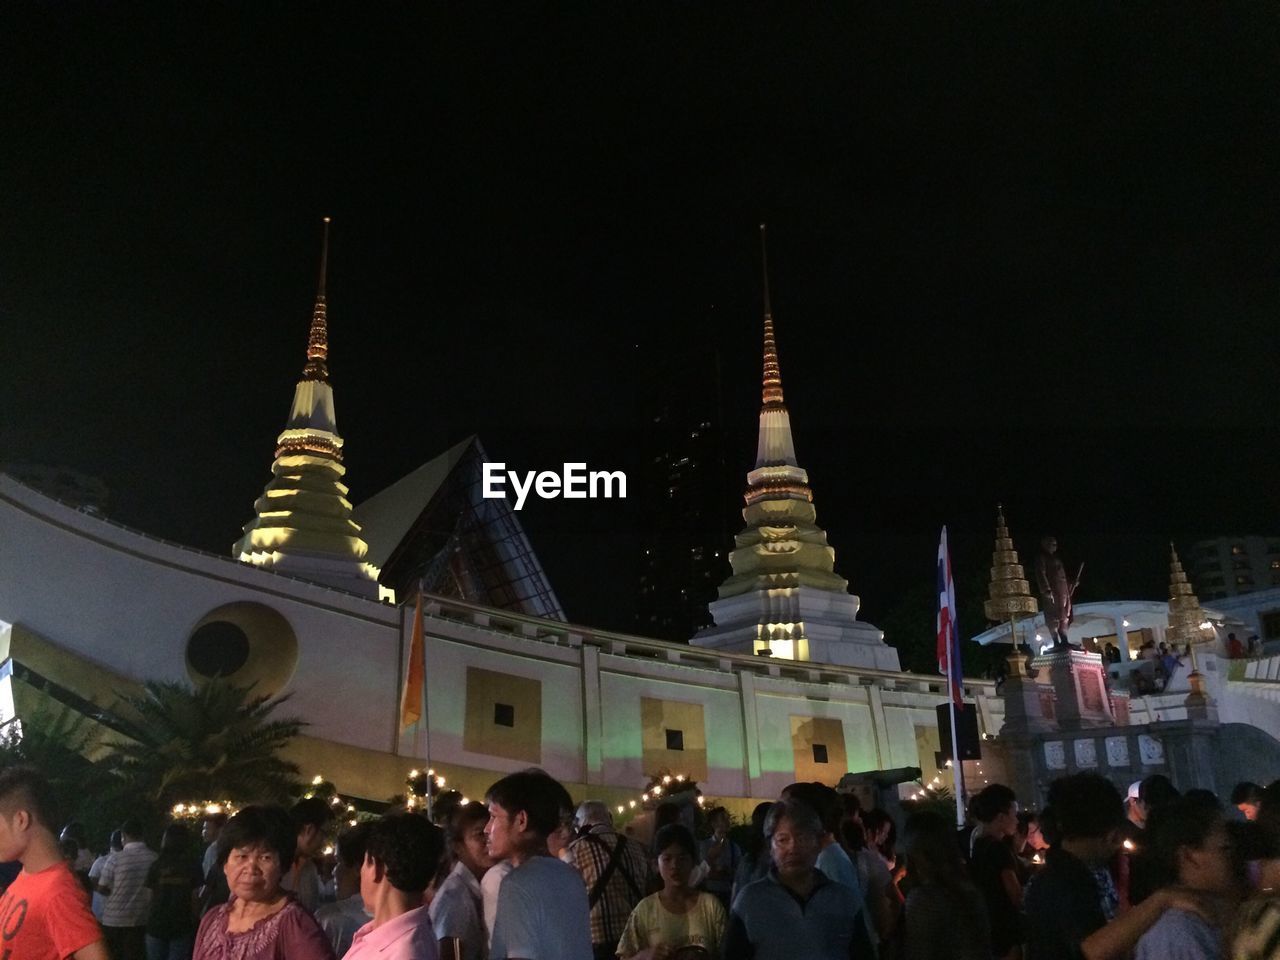 Crowd outside wat yannawa against clear sky at night